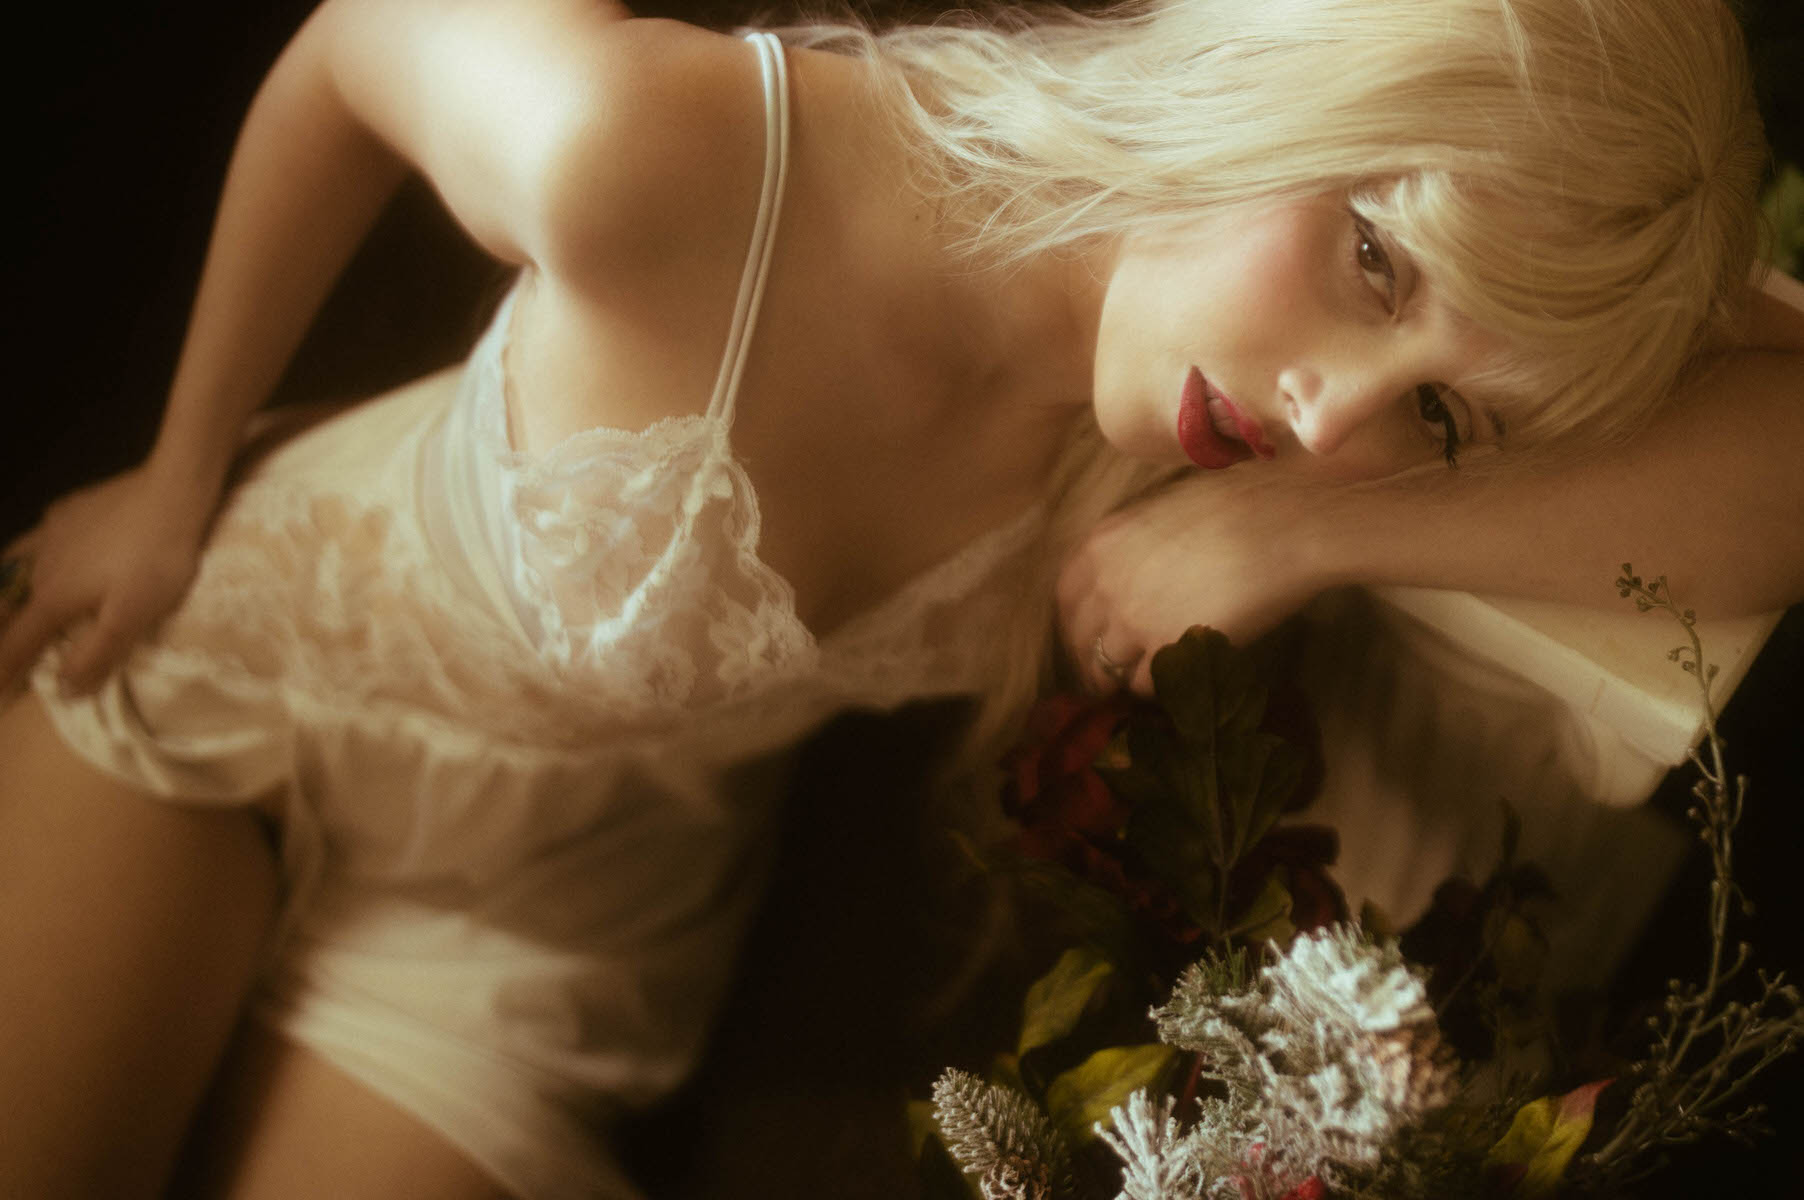 A woman in white lace lingerie reclining with flowers for a winter boudoir shoot, soft focus.